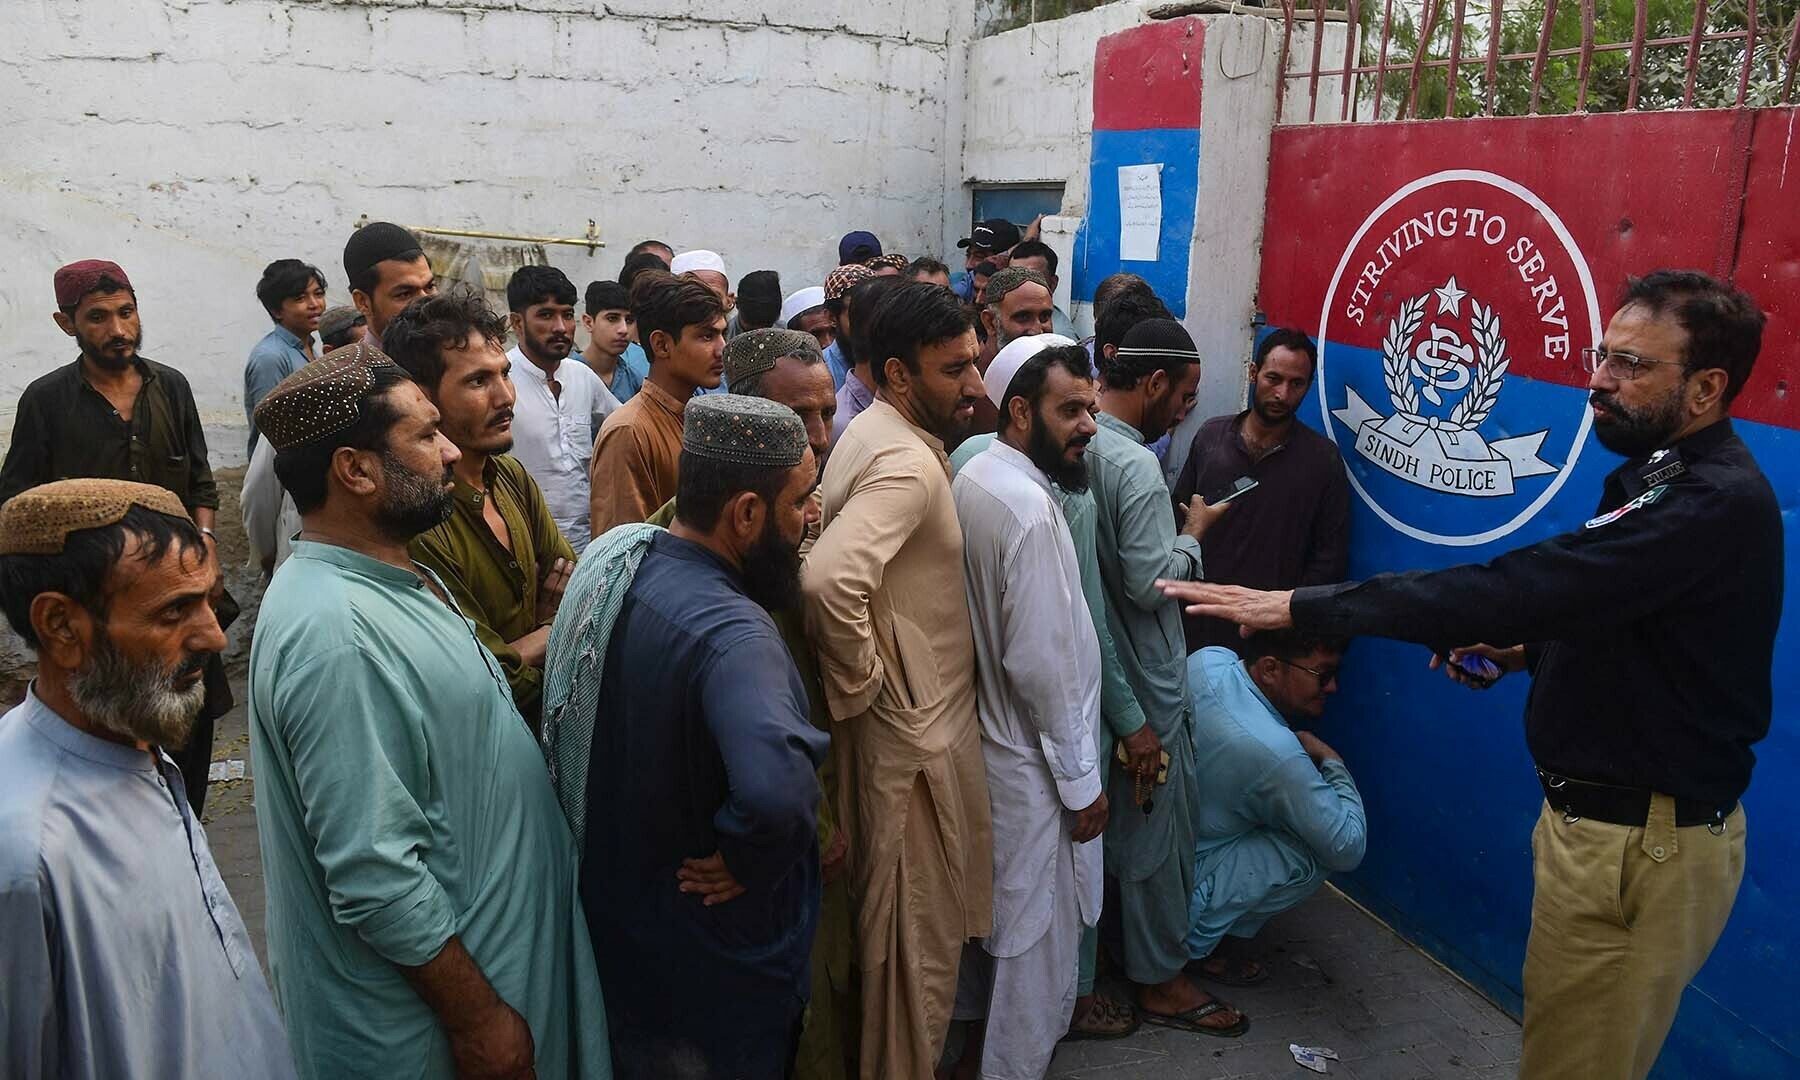 TOPSHOT - Afghan refugees queue outside a police station for their data verification by the National Database and Registration Authority (NADRA) in Karachi on November 8, 2023. More than 250,000 people have crossed from Pakistan to Afghanistan since an October ultimatum given to the 1.7 million Afghans Islamabad said were living illegally in the country. (Photo by Asif HASSAN / AFP)